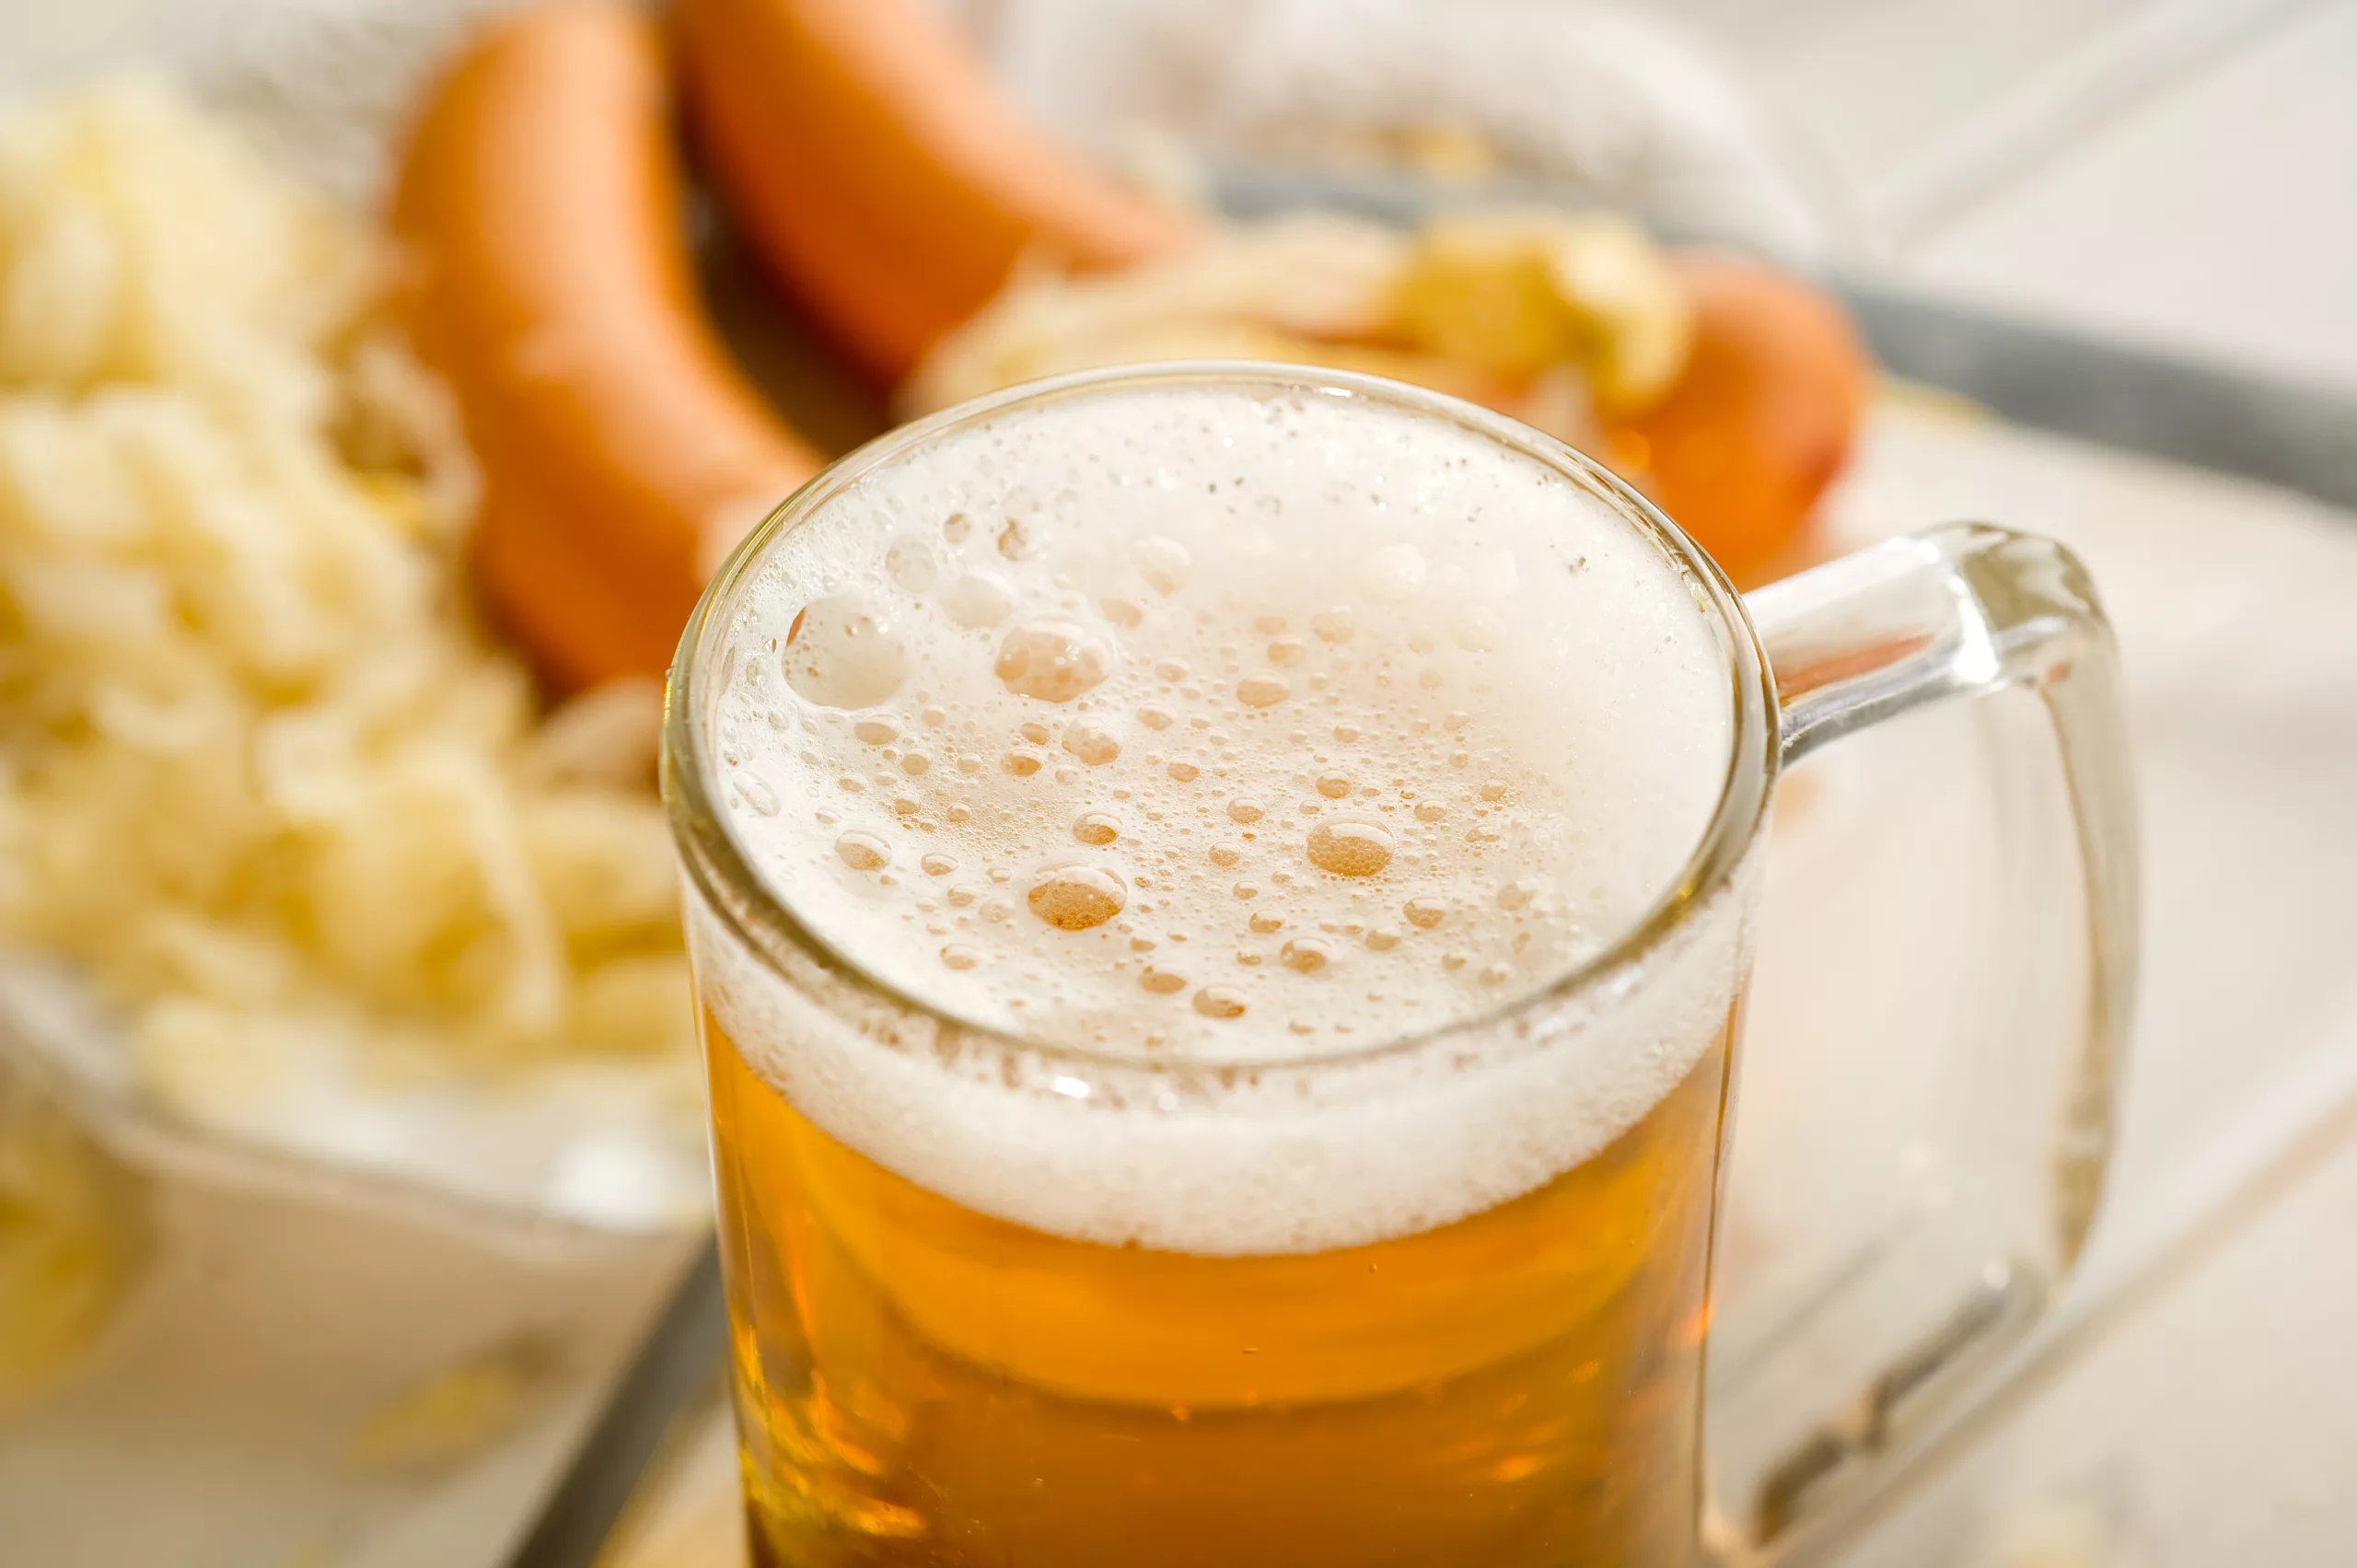 German Beer and Beer Culture – Why Is It So Irresistible and Famous?